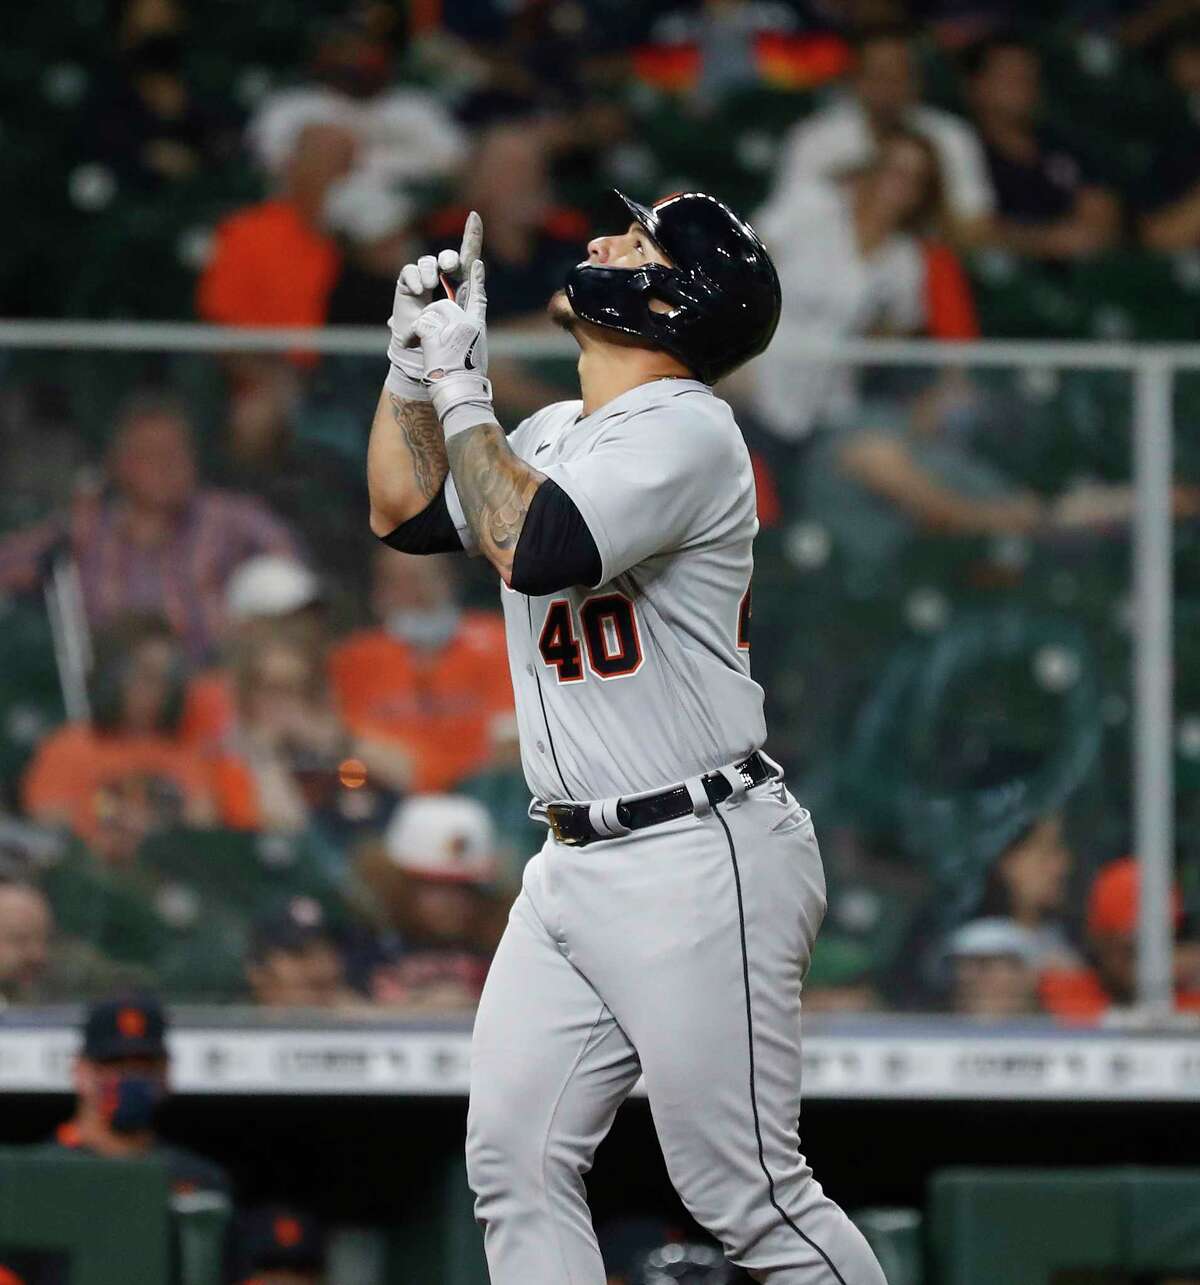 Detroit Tigers Wilson Ramos (40) celebrates his second home run of the night off of Houston Astros pitcher Bryan Abreu during the fifth inning of an MLB baseball game at Minute Maid Park, in Houston, Tuesday, April 13, 2021.